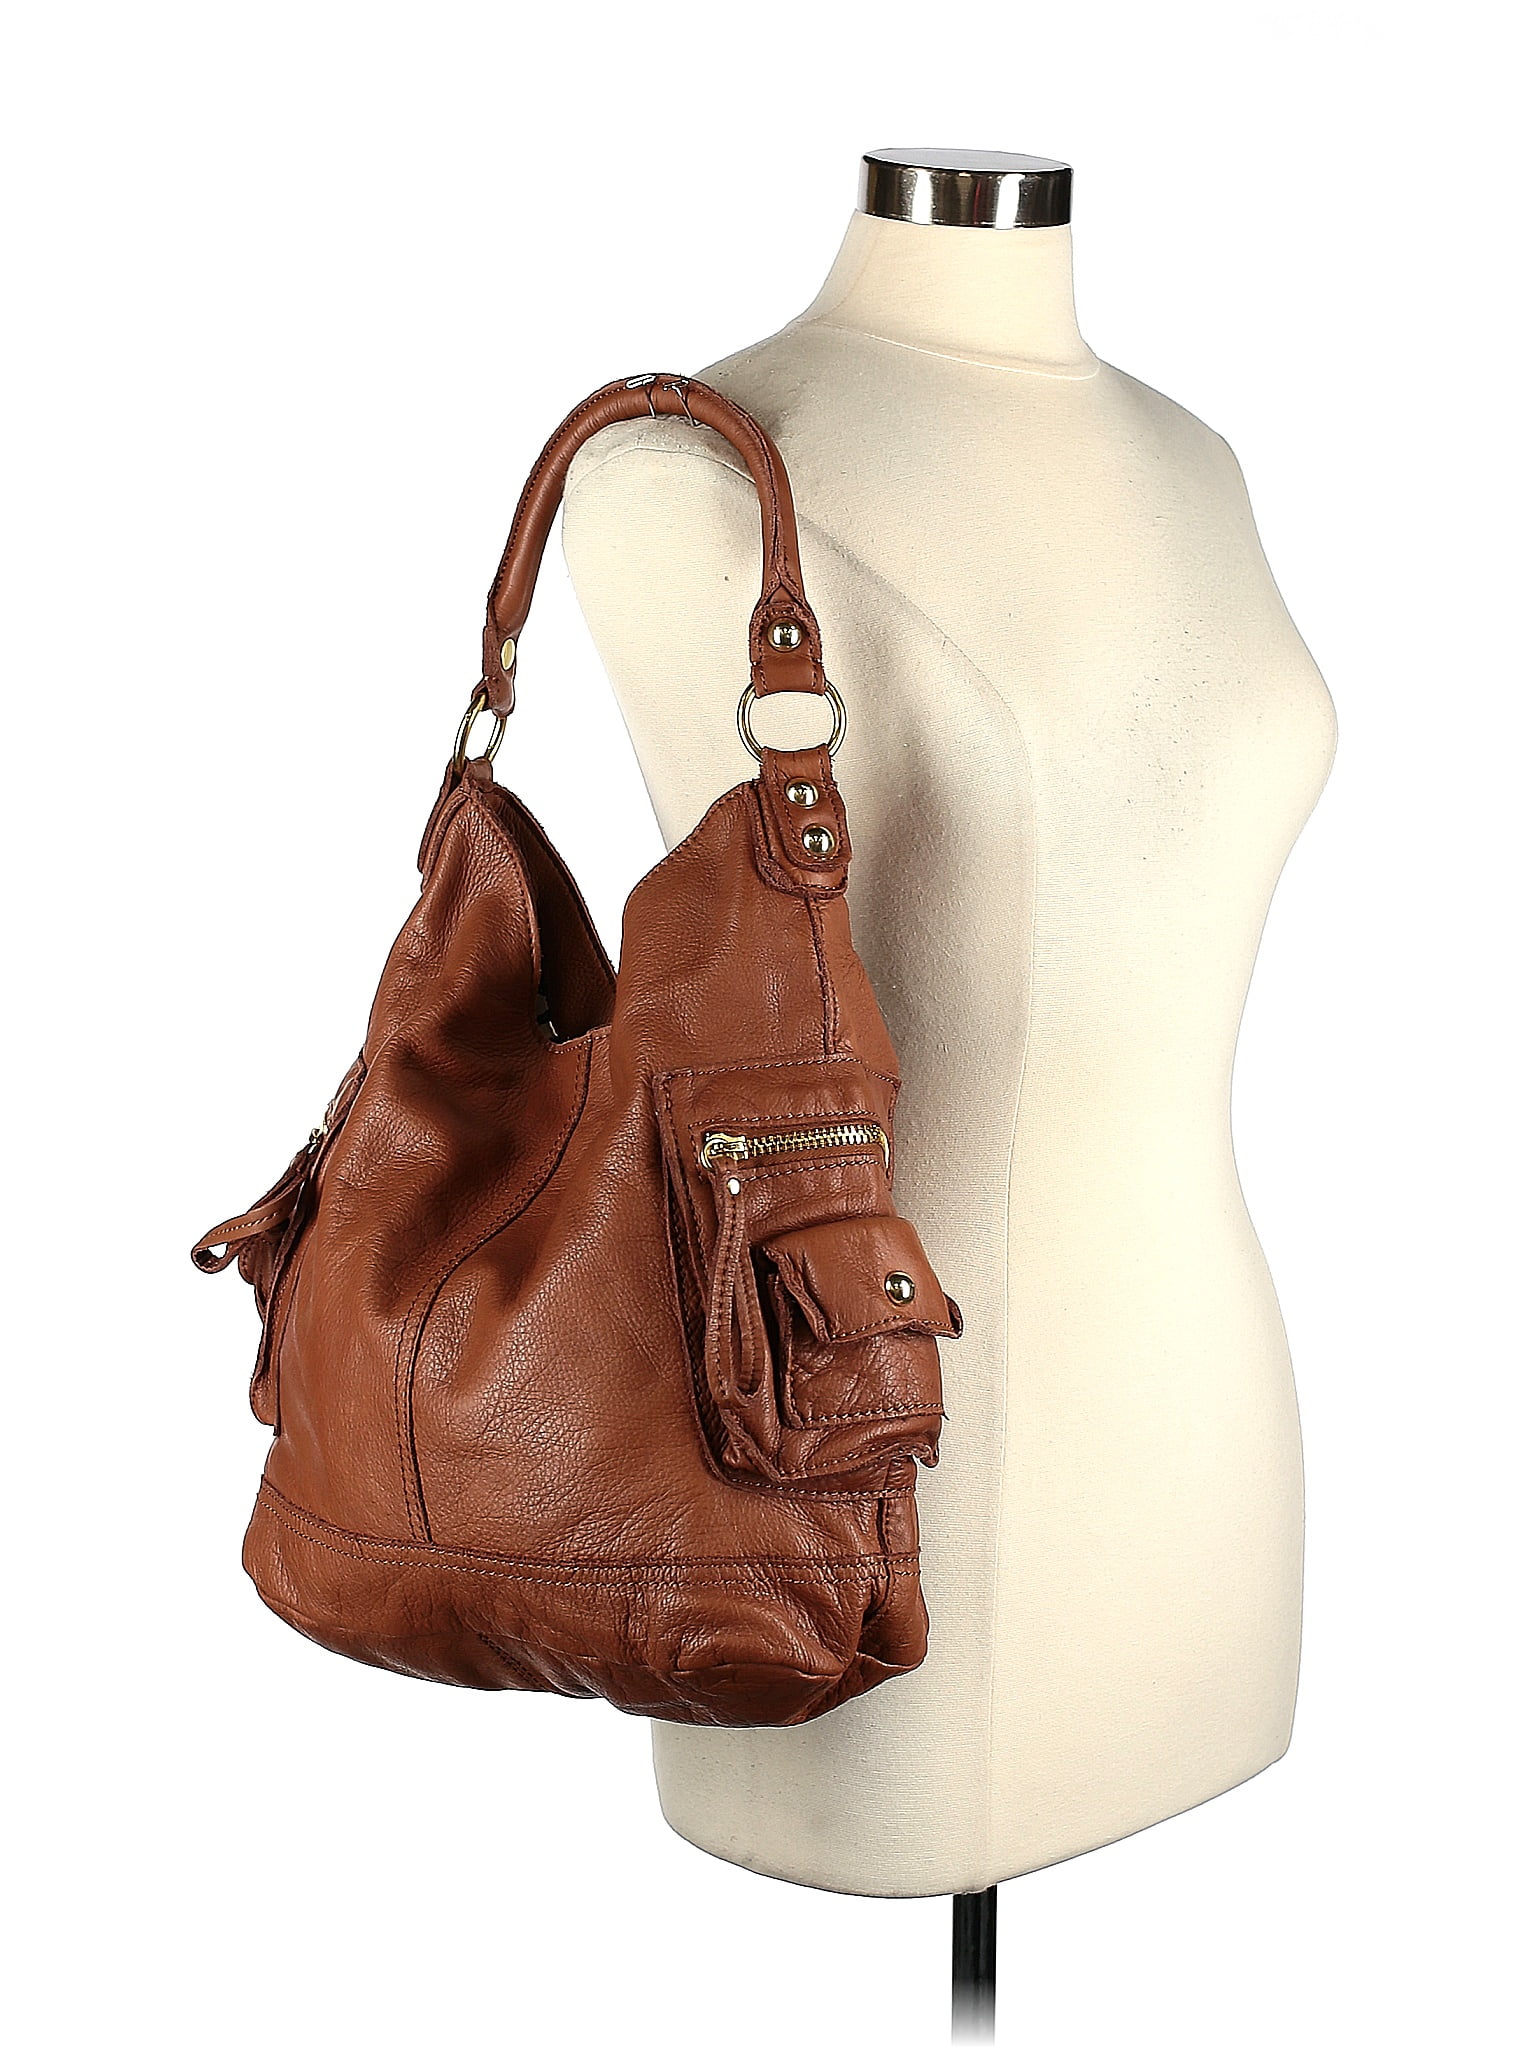 LP by Linea Pelle Handbags On Sale Up To 90% Off Retail